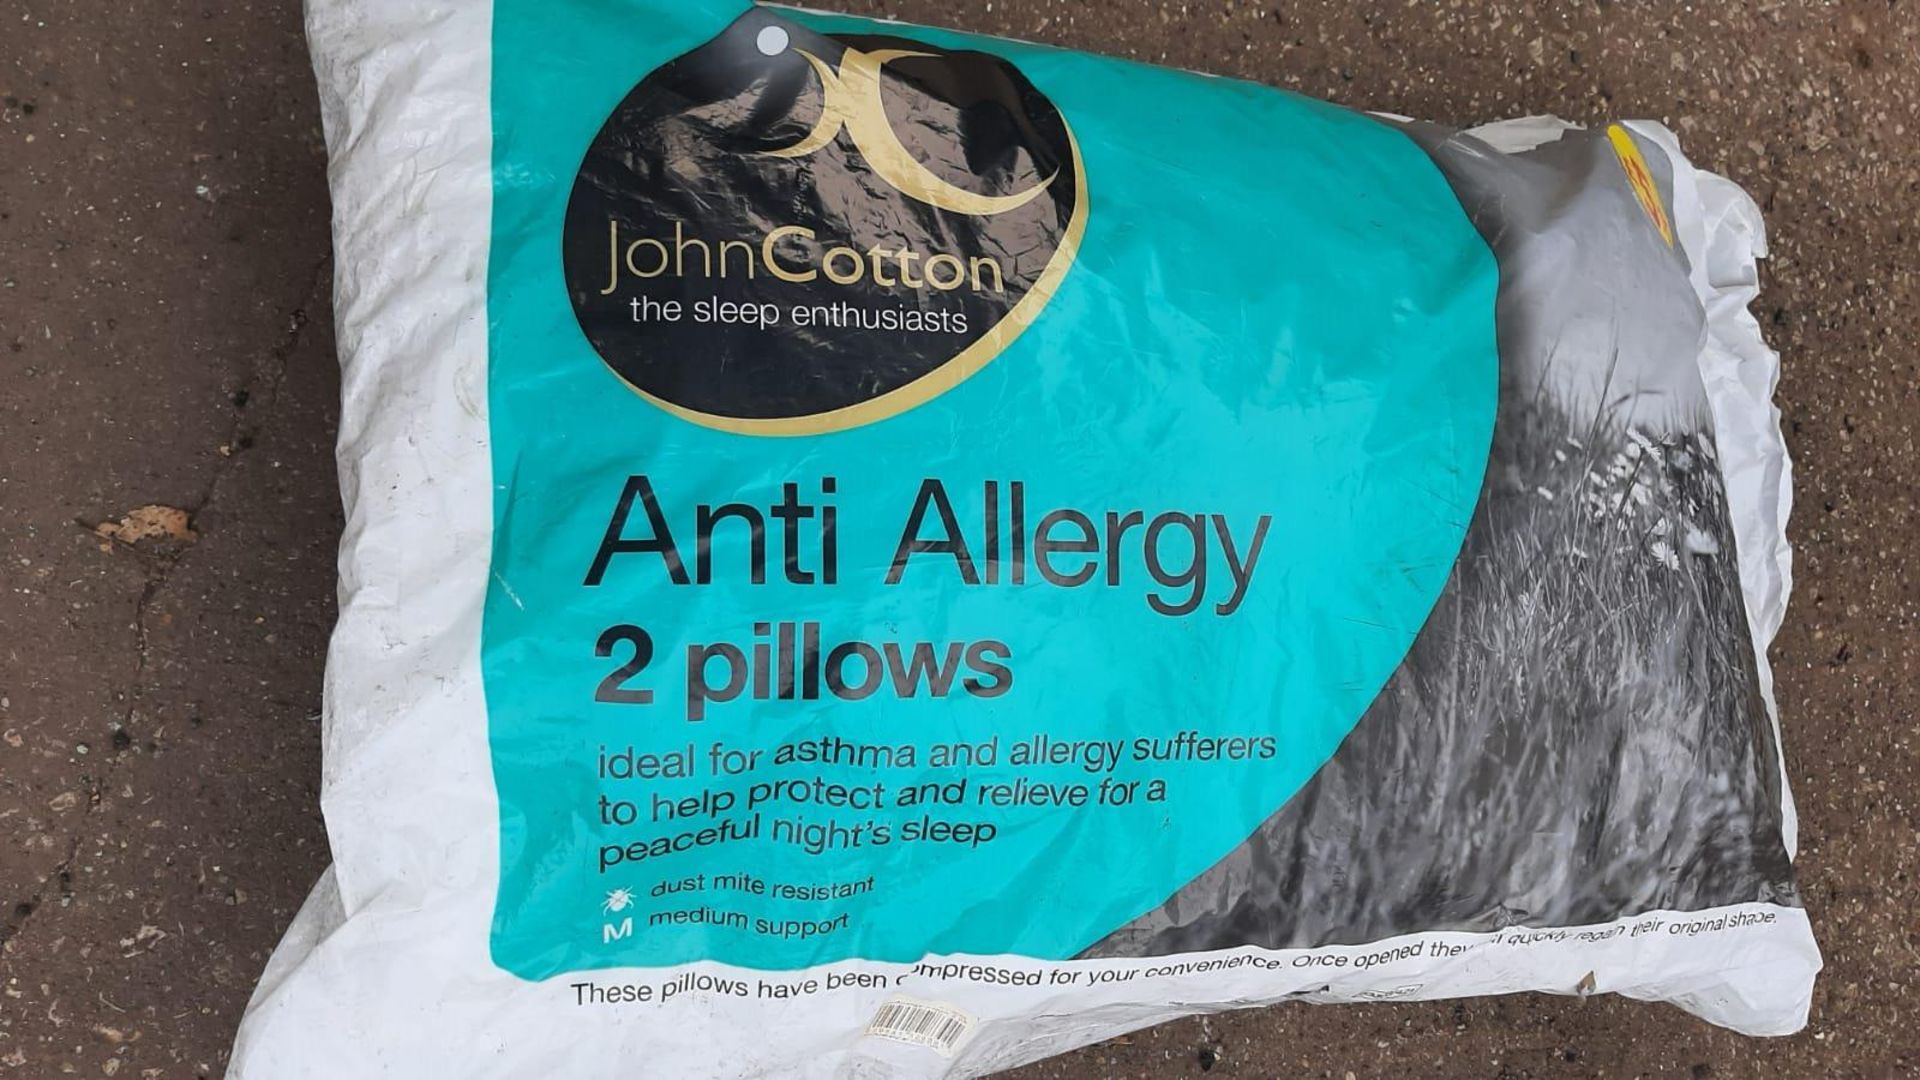 20 X NEW JOHN COTTON TWIN PACK PILLOWS, RRP £5.99 PER PACK *NO VAT* - Image 2 of 3